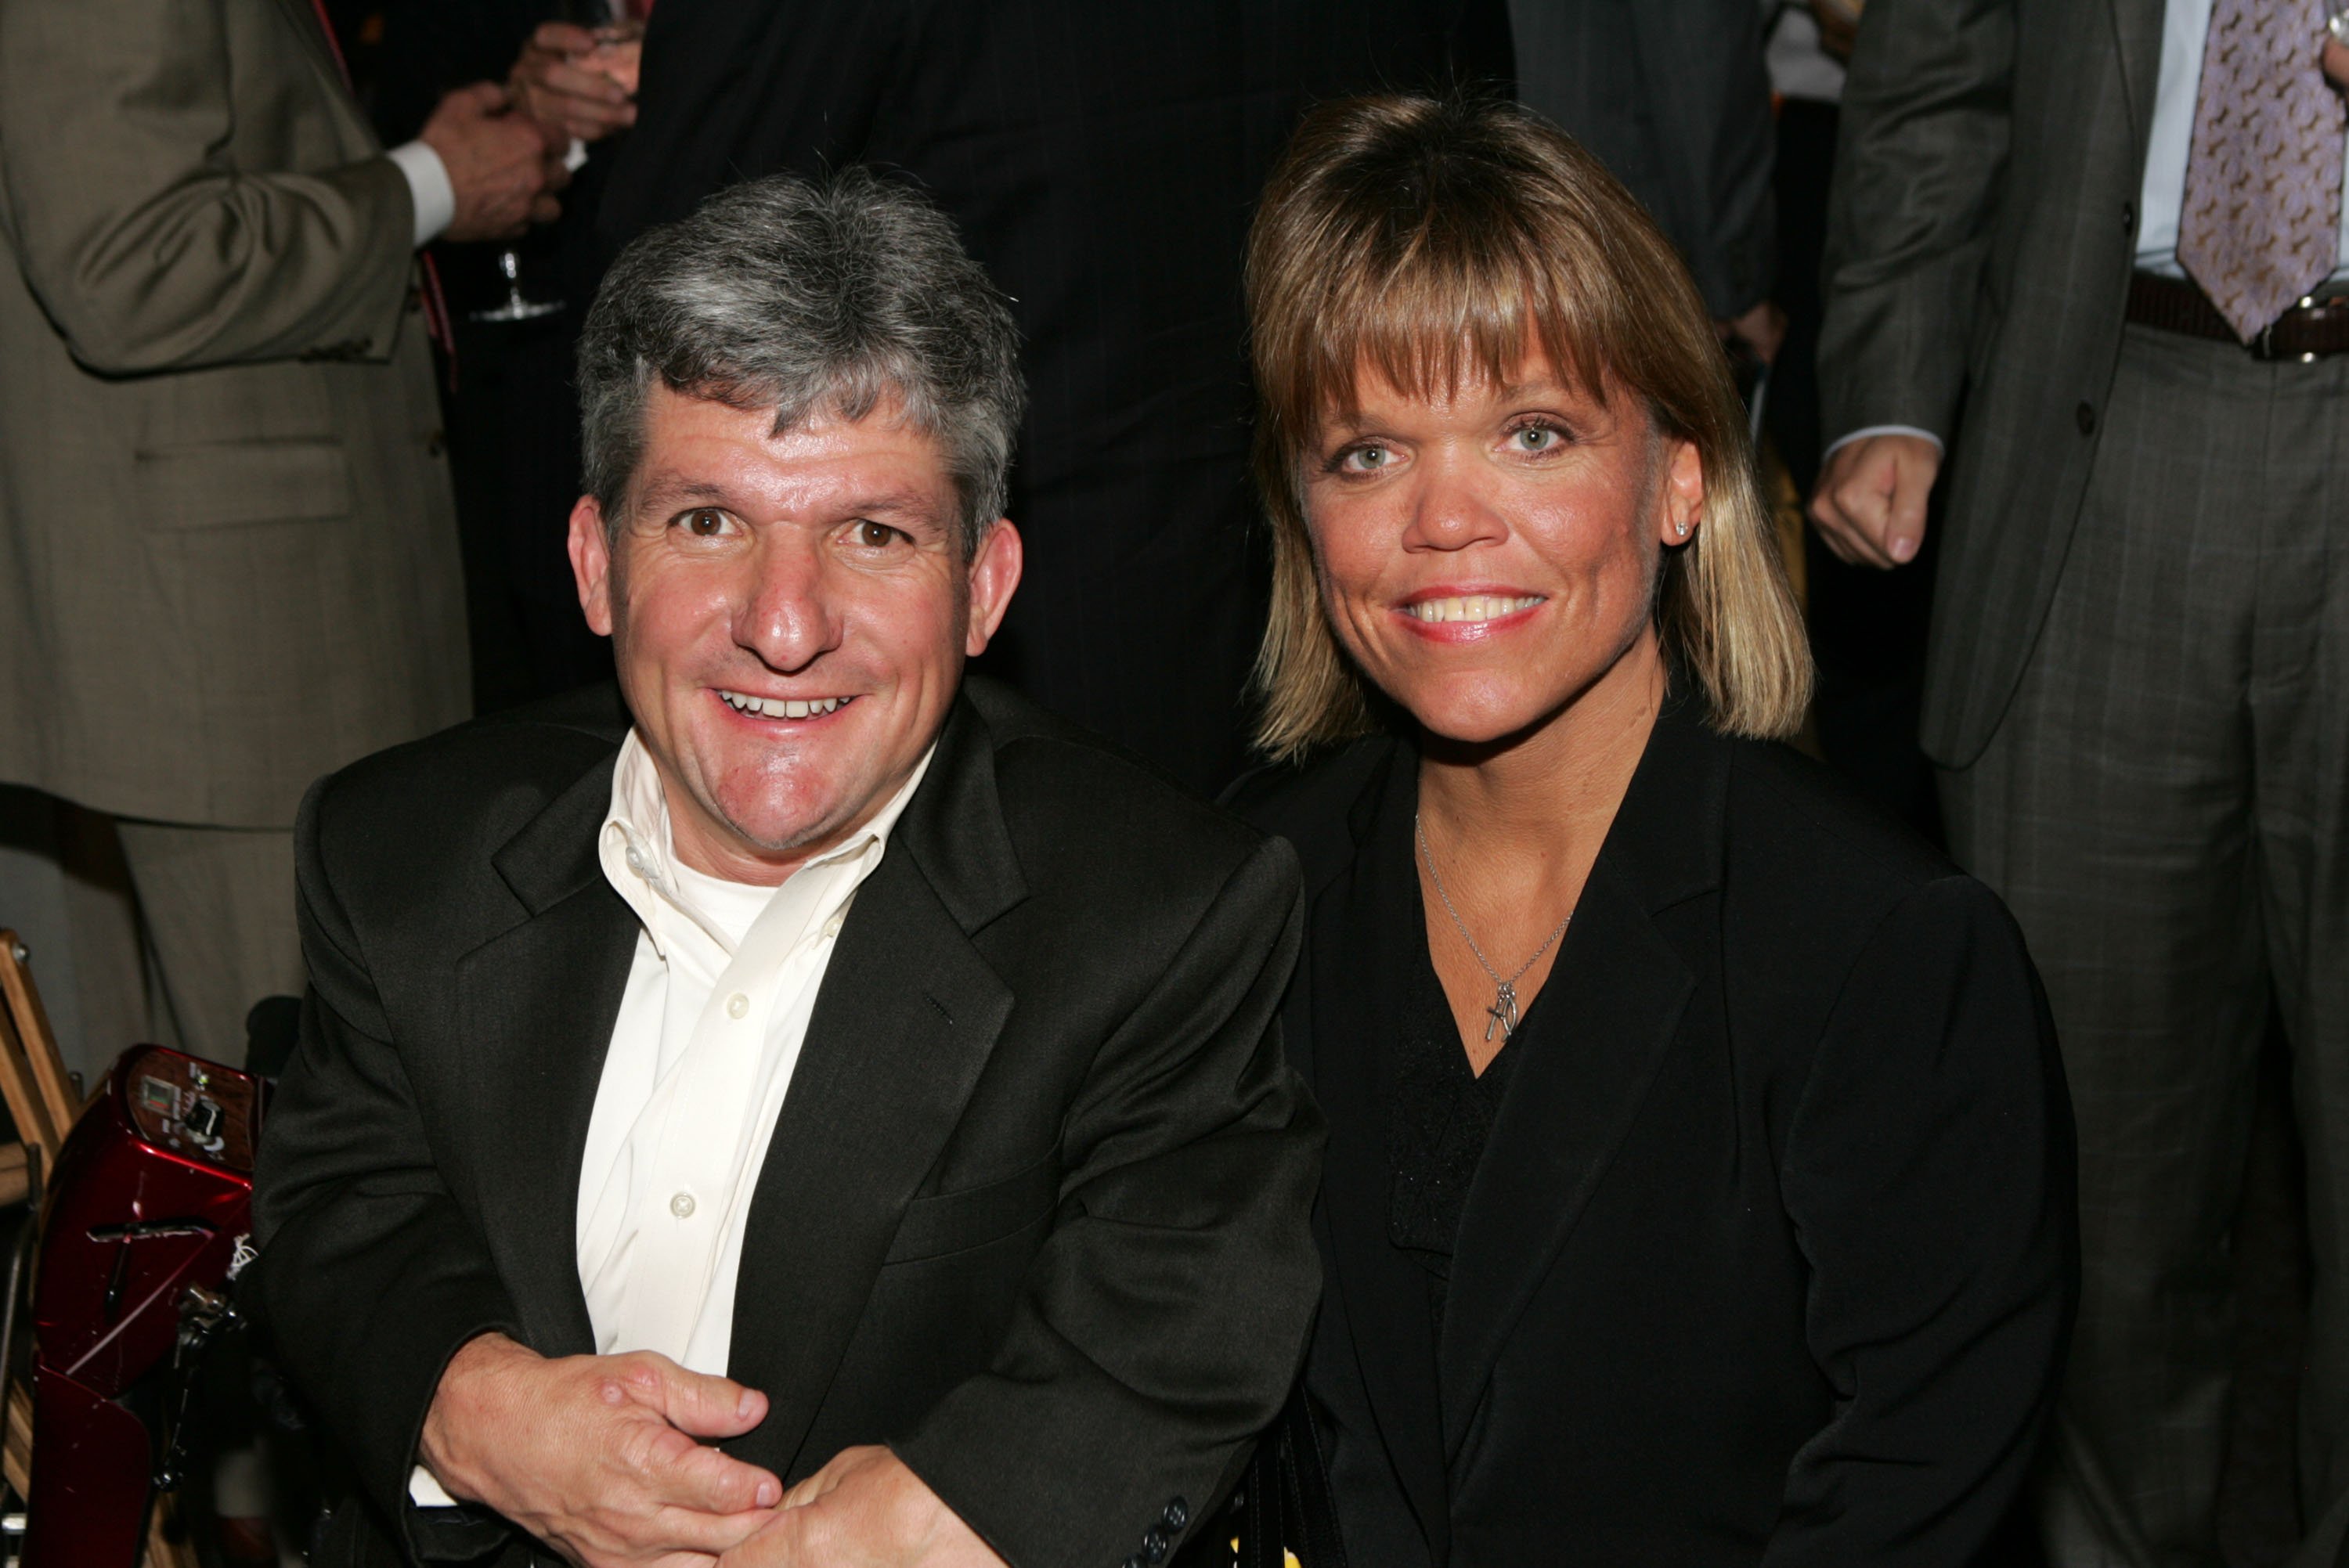 Matt Roloff and Amy Roloff during a 2008 event in New York City. | Photo: Getty Images